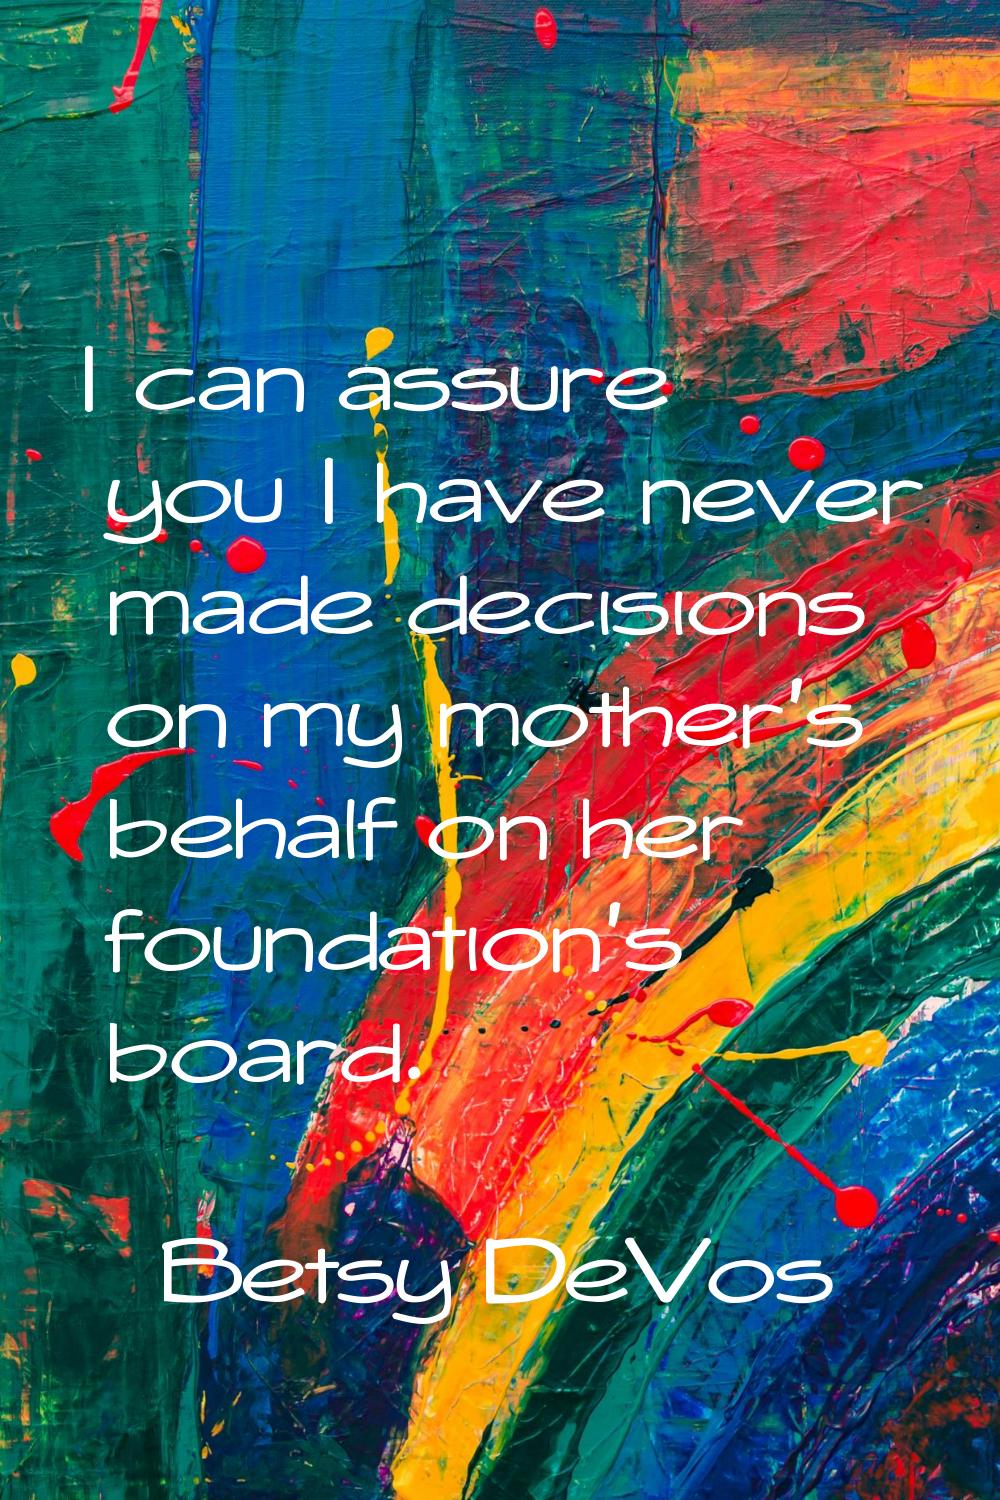 I can assure you I have never made decisions on my mother's behalf on her foundation's board.